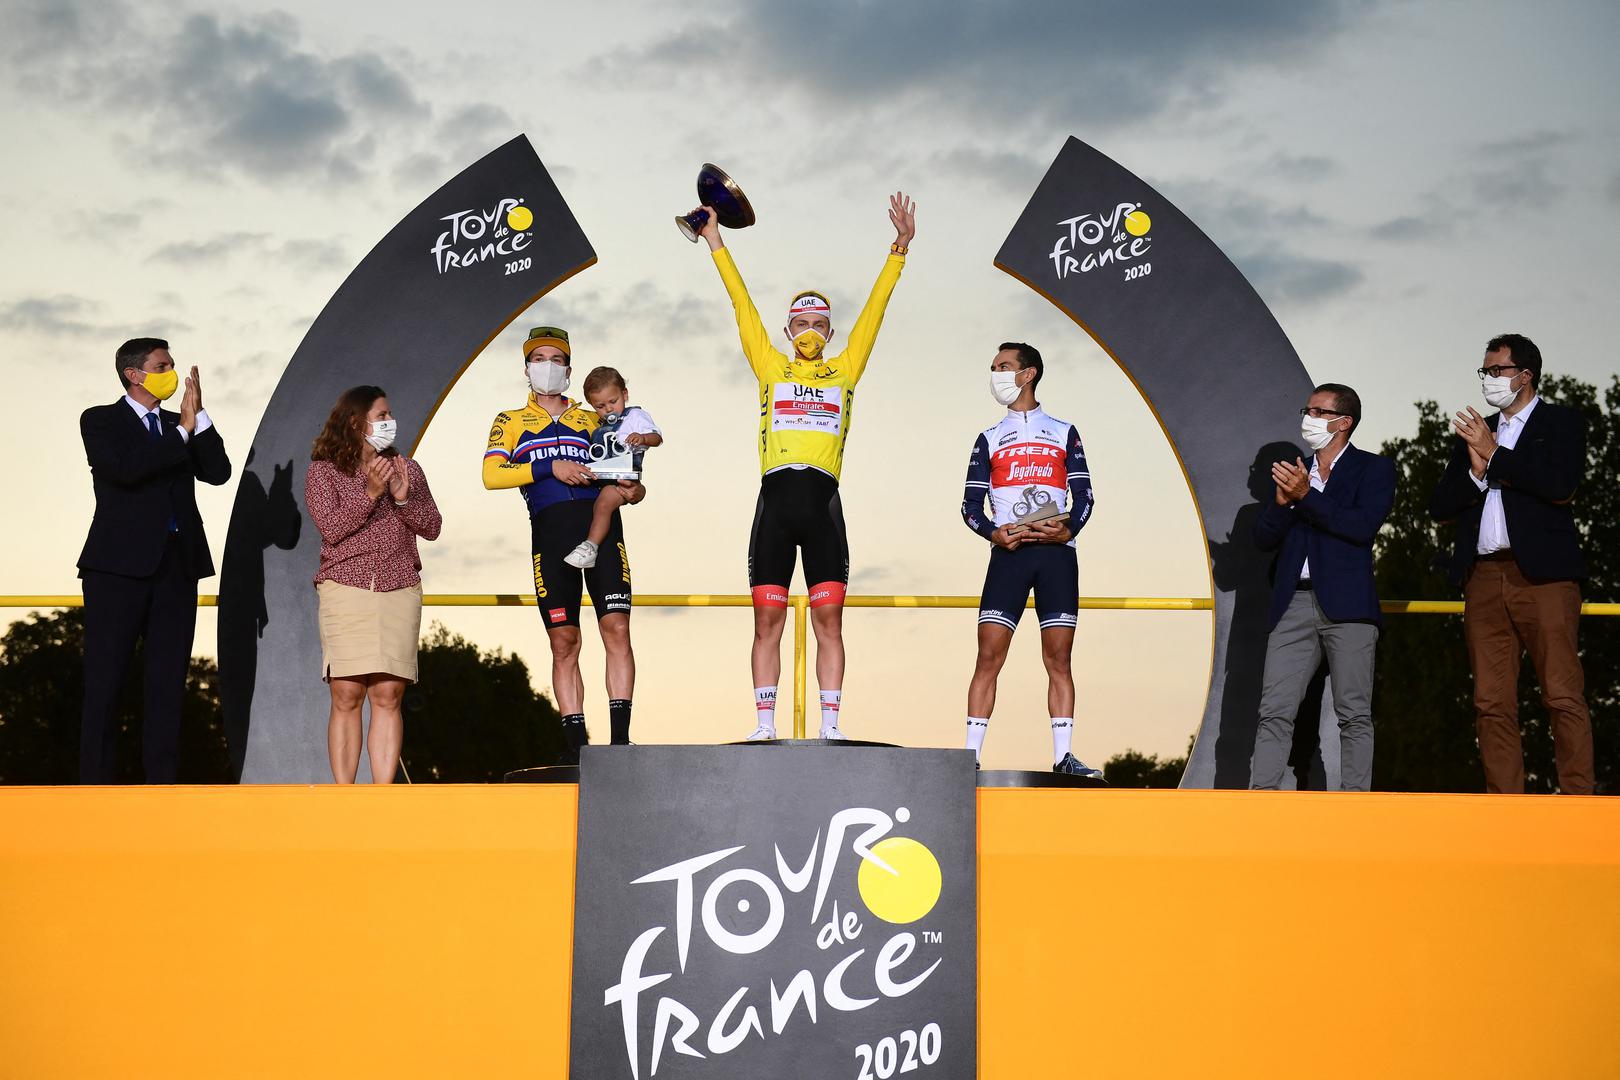 Tadej Pogacar wins Tour de France 2020 Handout. L-R, second Primoz Roglic of Team Jumbo - Visma , winner yellow jersey Slovenian Tadej Pogacar of UAE Team Emirates and third Richie Porte of Trek - Segafredo, celebrate on the podium after the final stage of the 107th edition of the Tour de France cycling race, 122km from Mantes-la-Jolie to Paris, in France, Sunday 20 September 2020. This year's Tour de France was postponed due to the worldwide Covid-19 pandemic. The 2020 race starts in Nice on Saturday 29 August and ends on 20 September. Photo by Pauline Ballet/ASO via ABACAPRESS.COM ABACA /PIXSELL